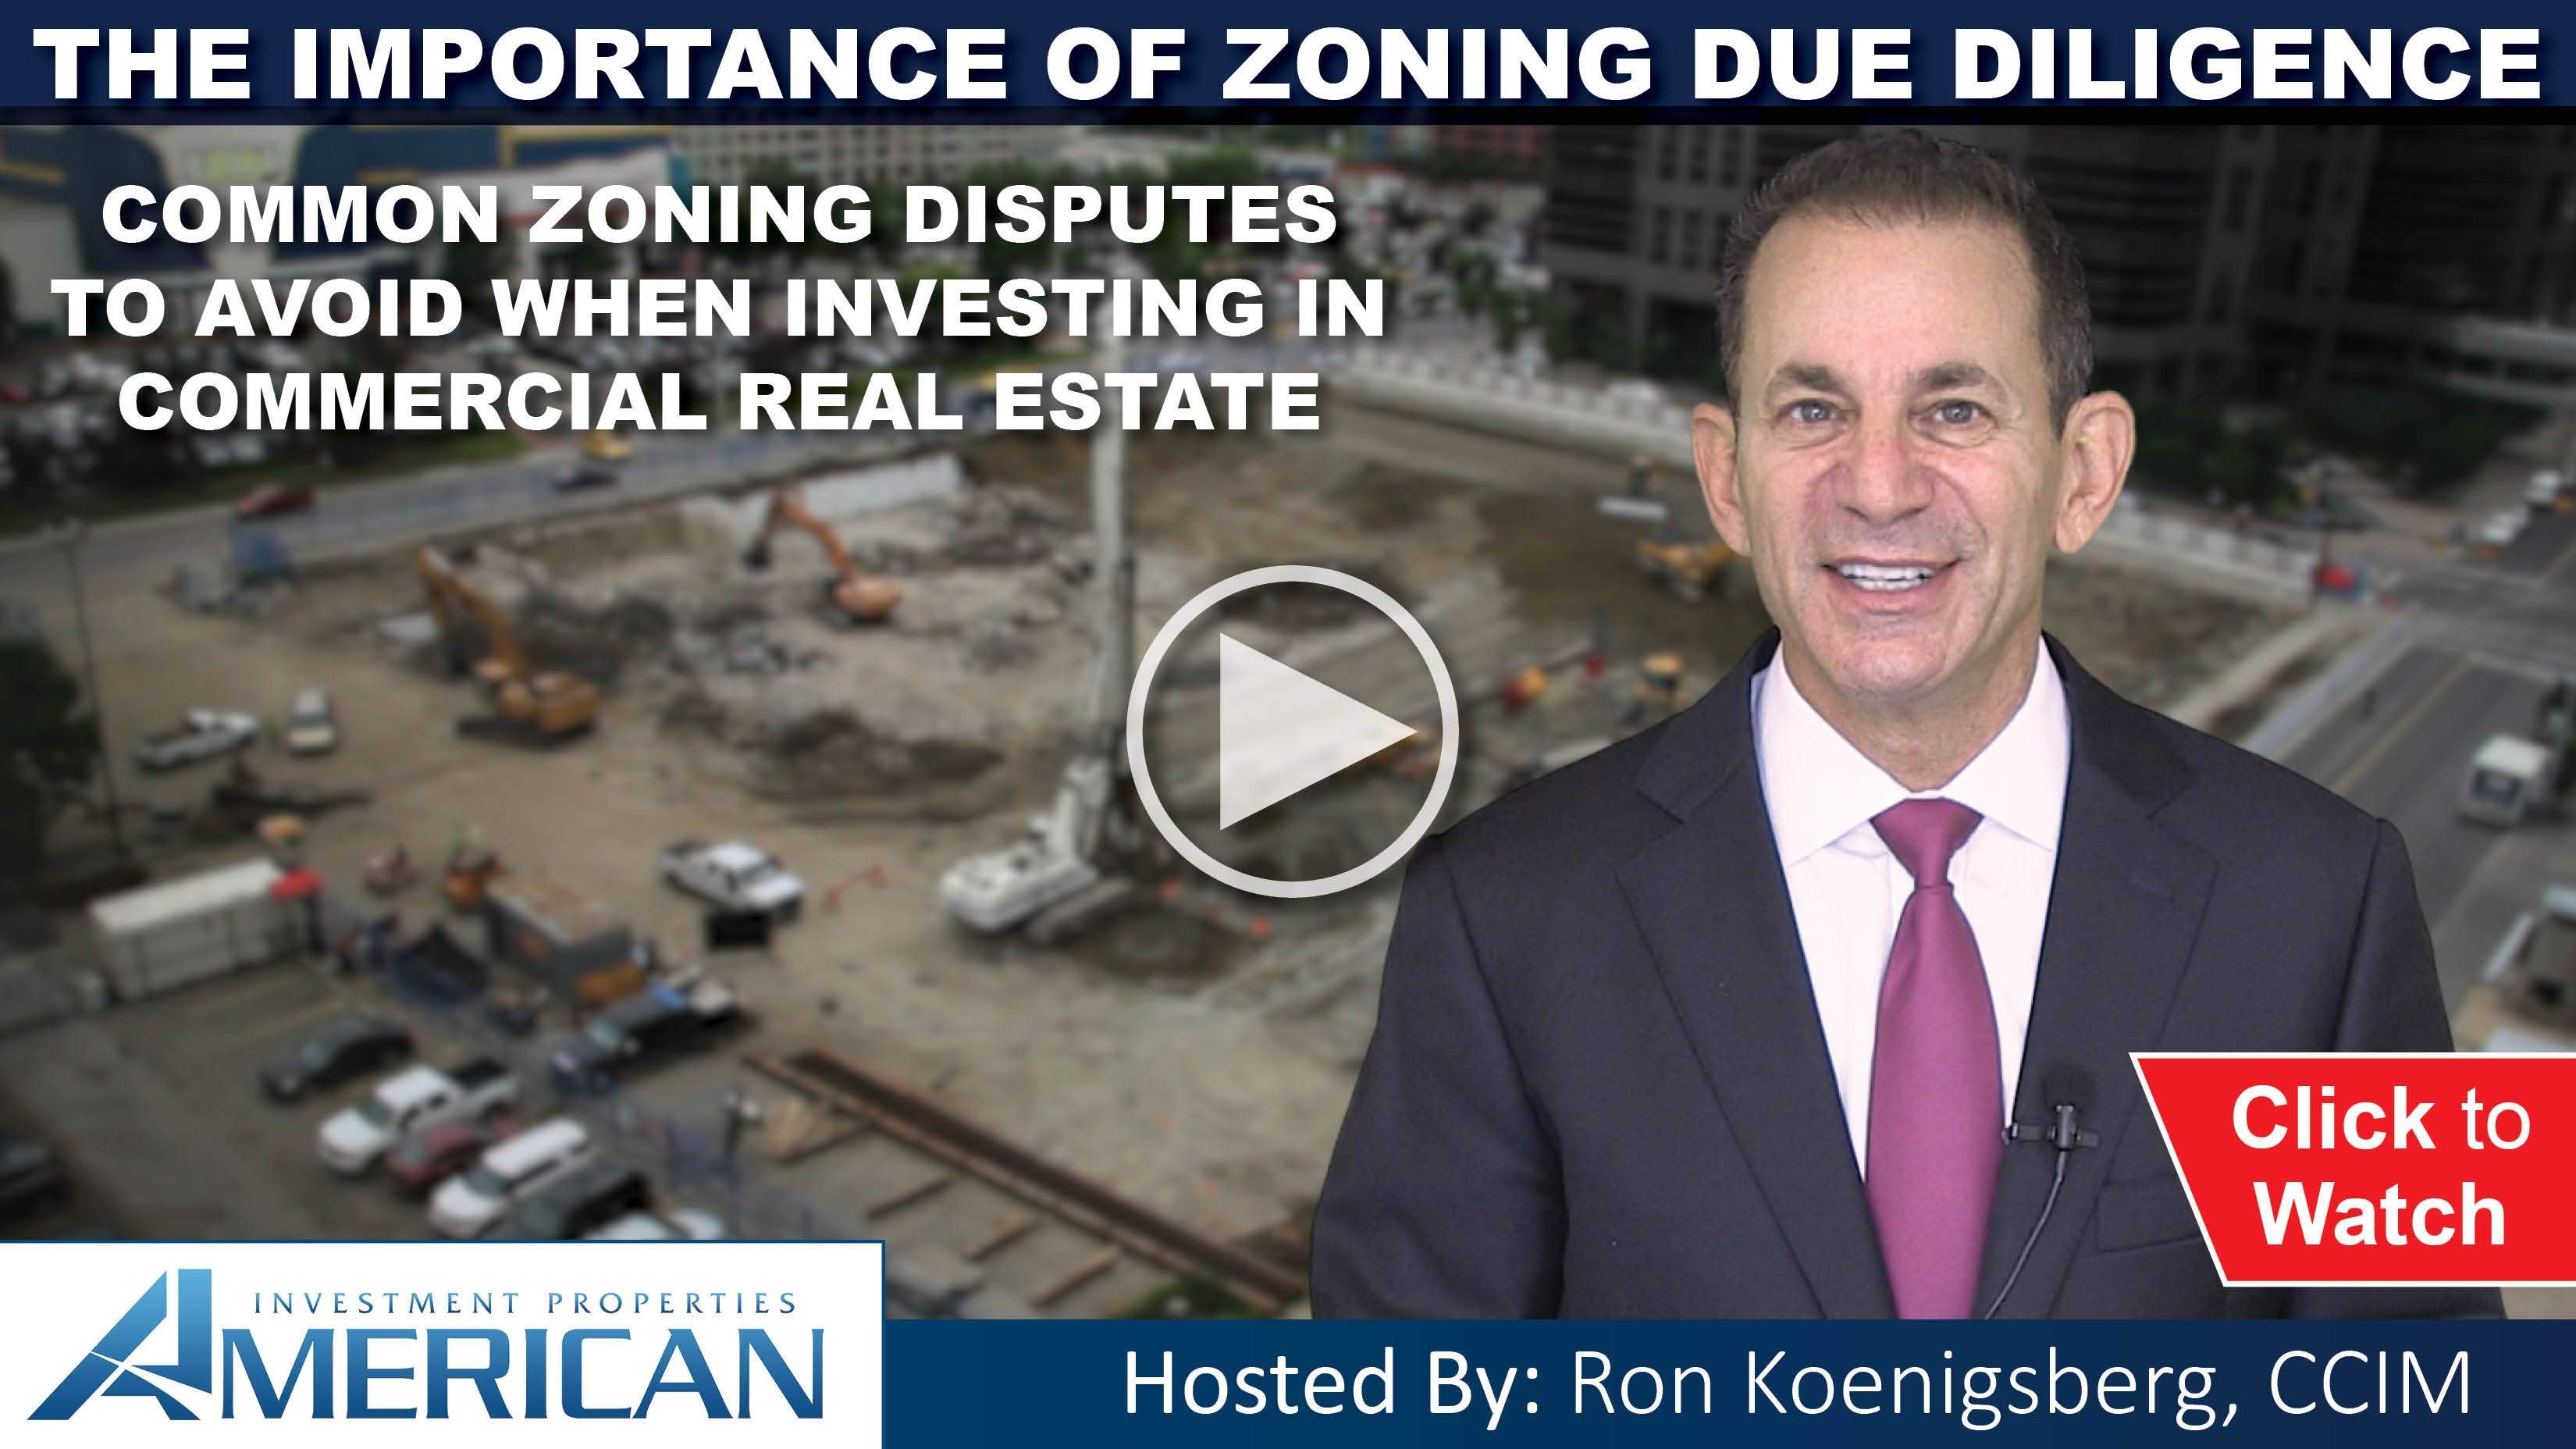 Zoning Due Diligence in Commercial Real Estate Video